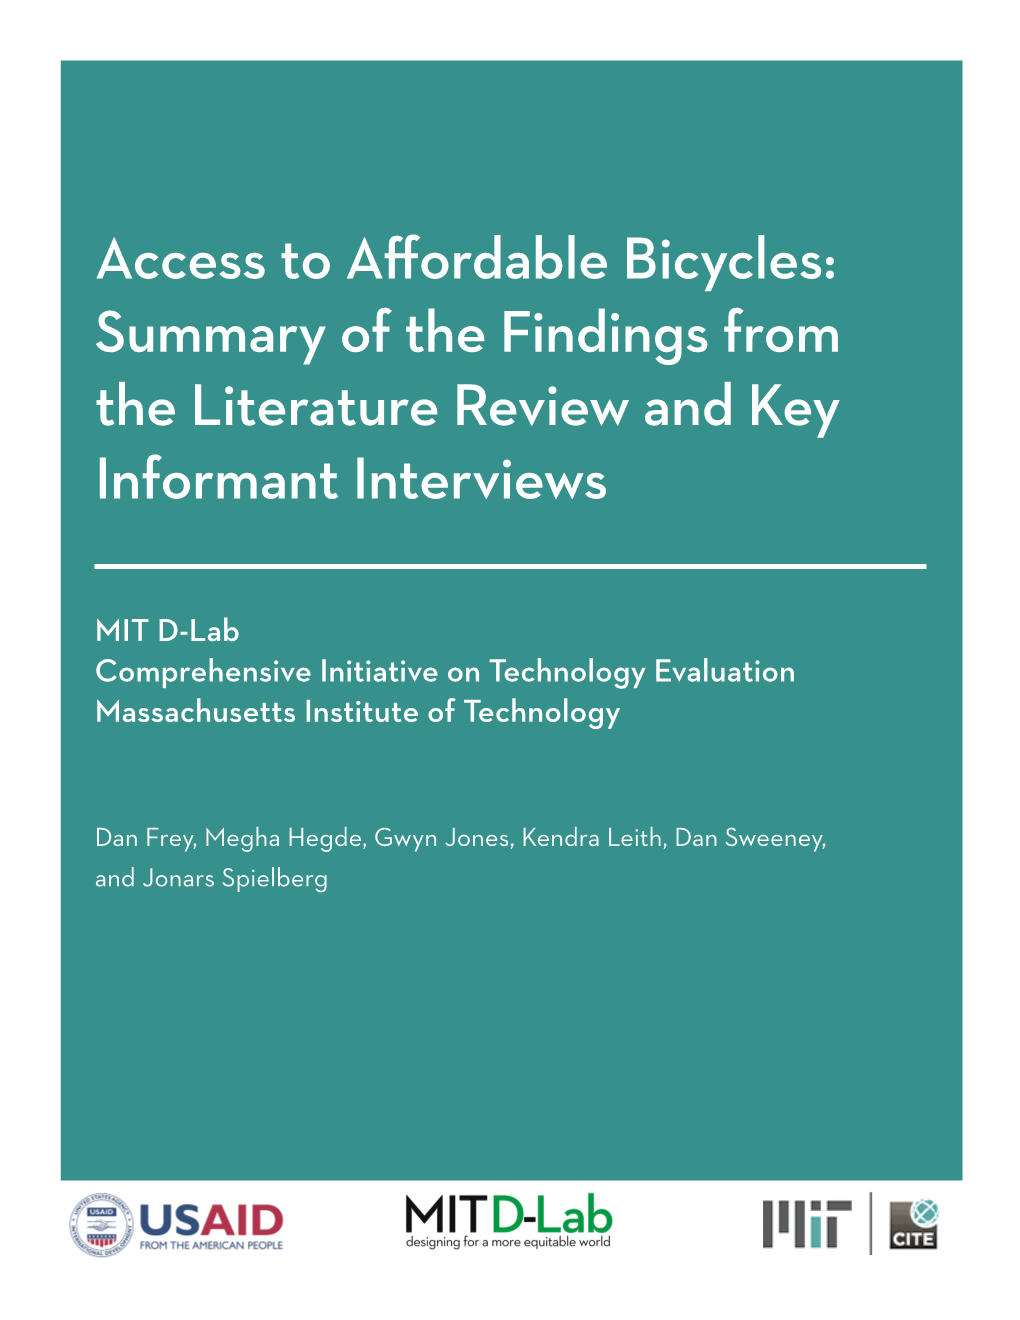 Access to Affordable Bicycles: Summary of the Findings from the Literature Review and Key Informant Interviews